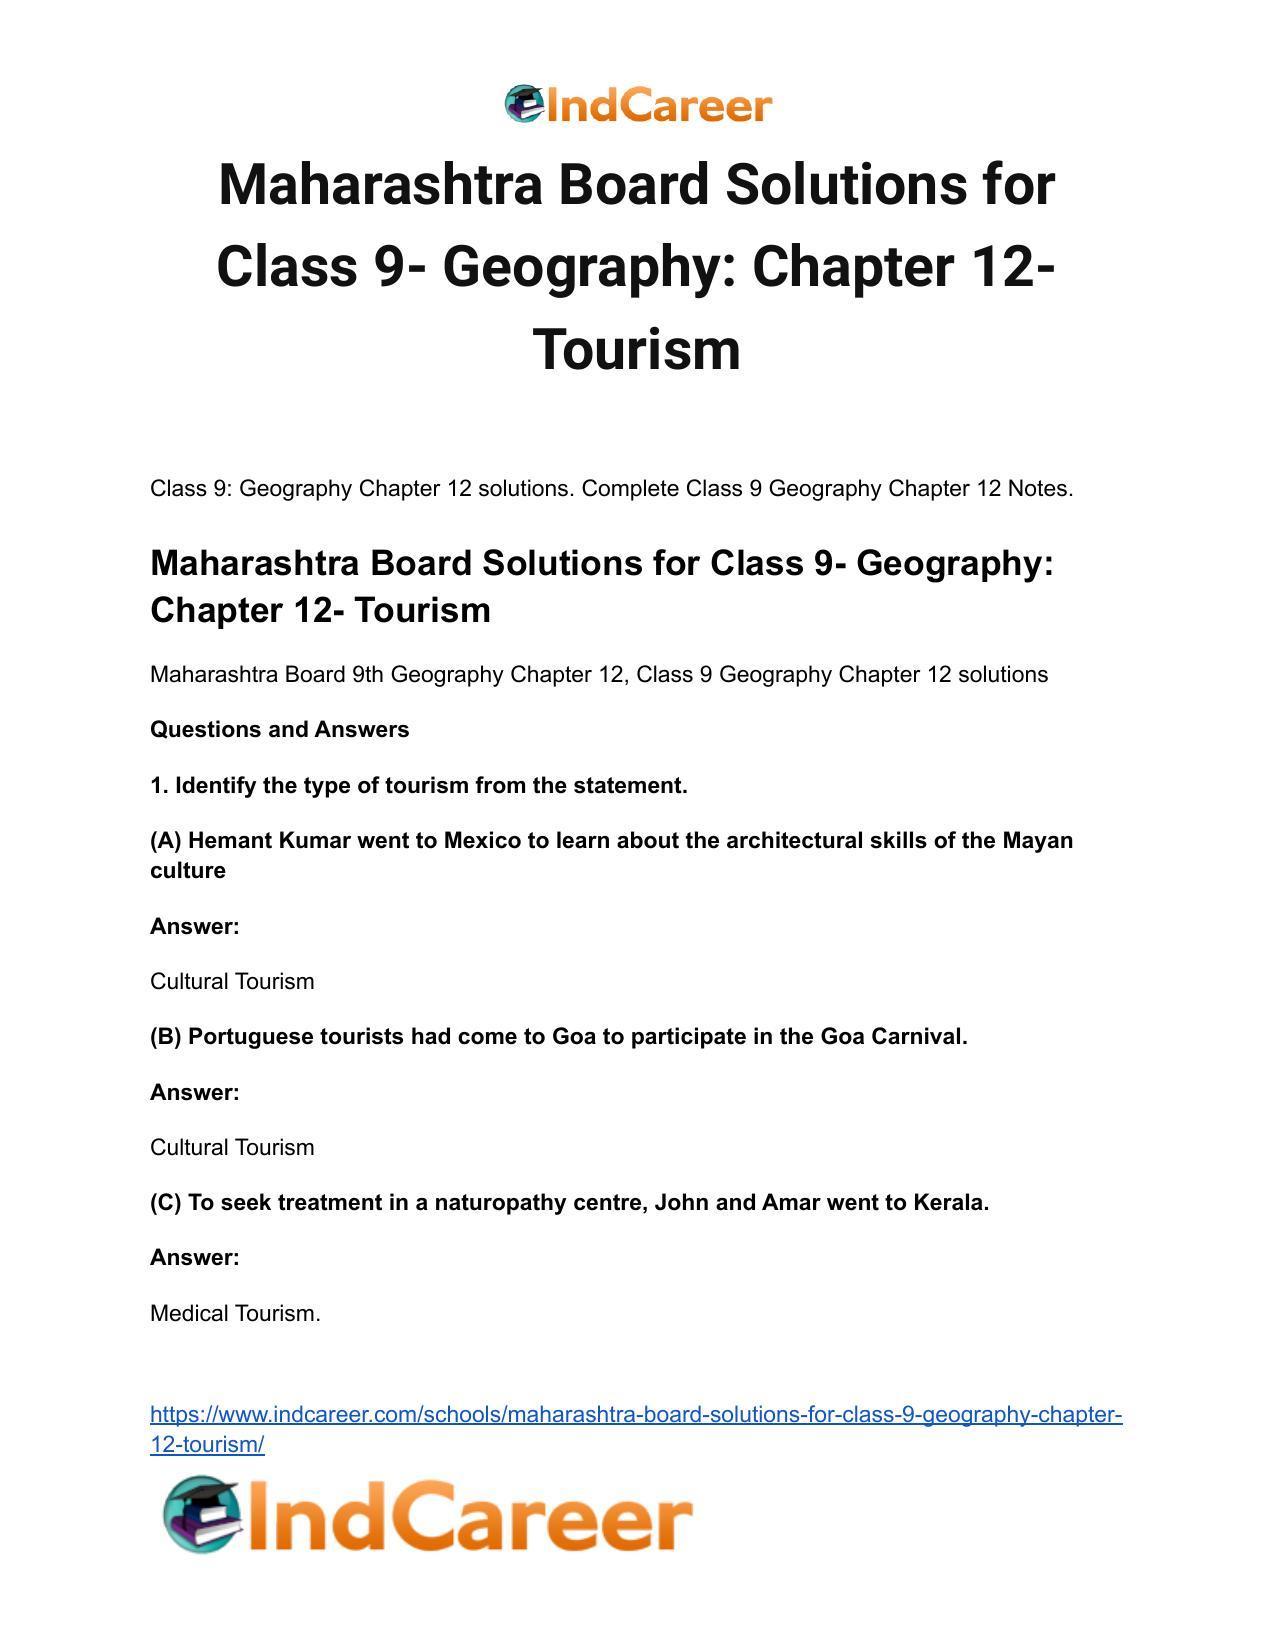 Maharashtra Board Solutions for Class 9- Geography: Chapter 12- Tourism - Page 2